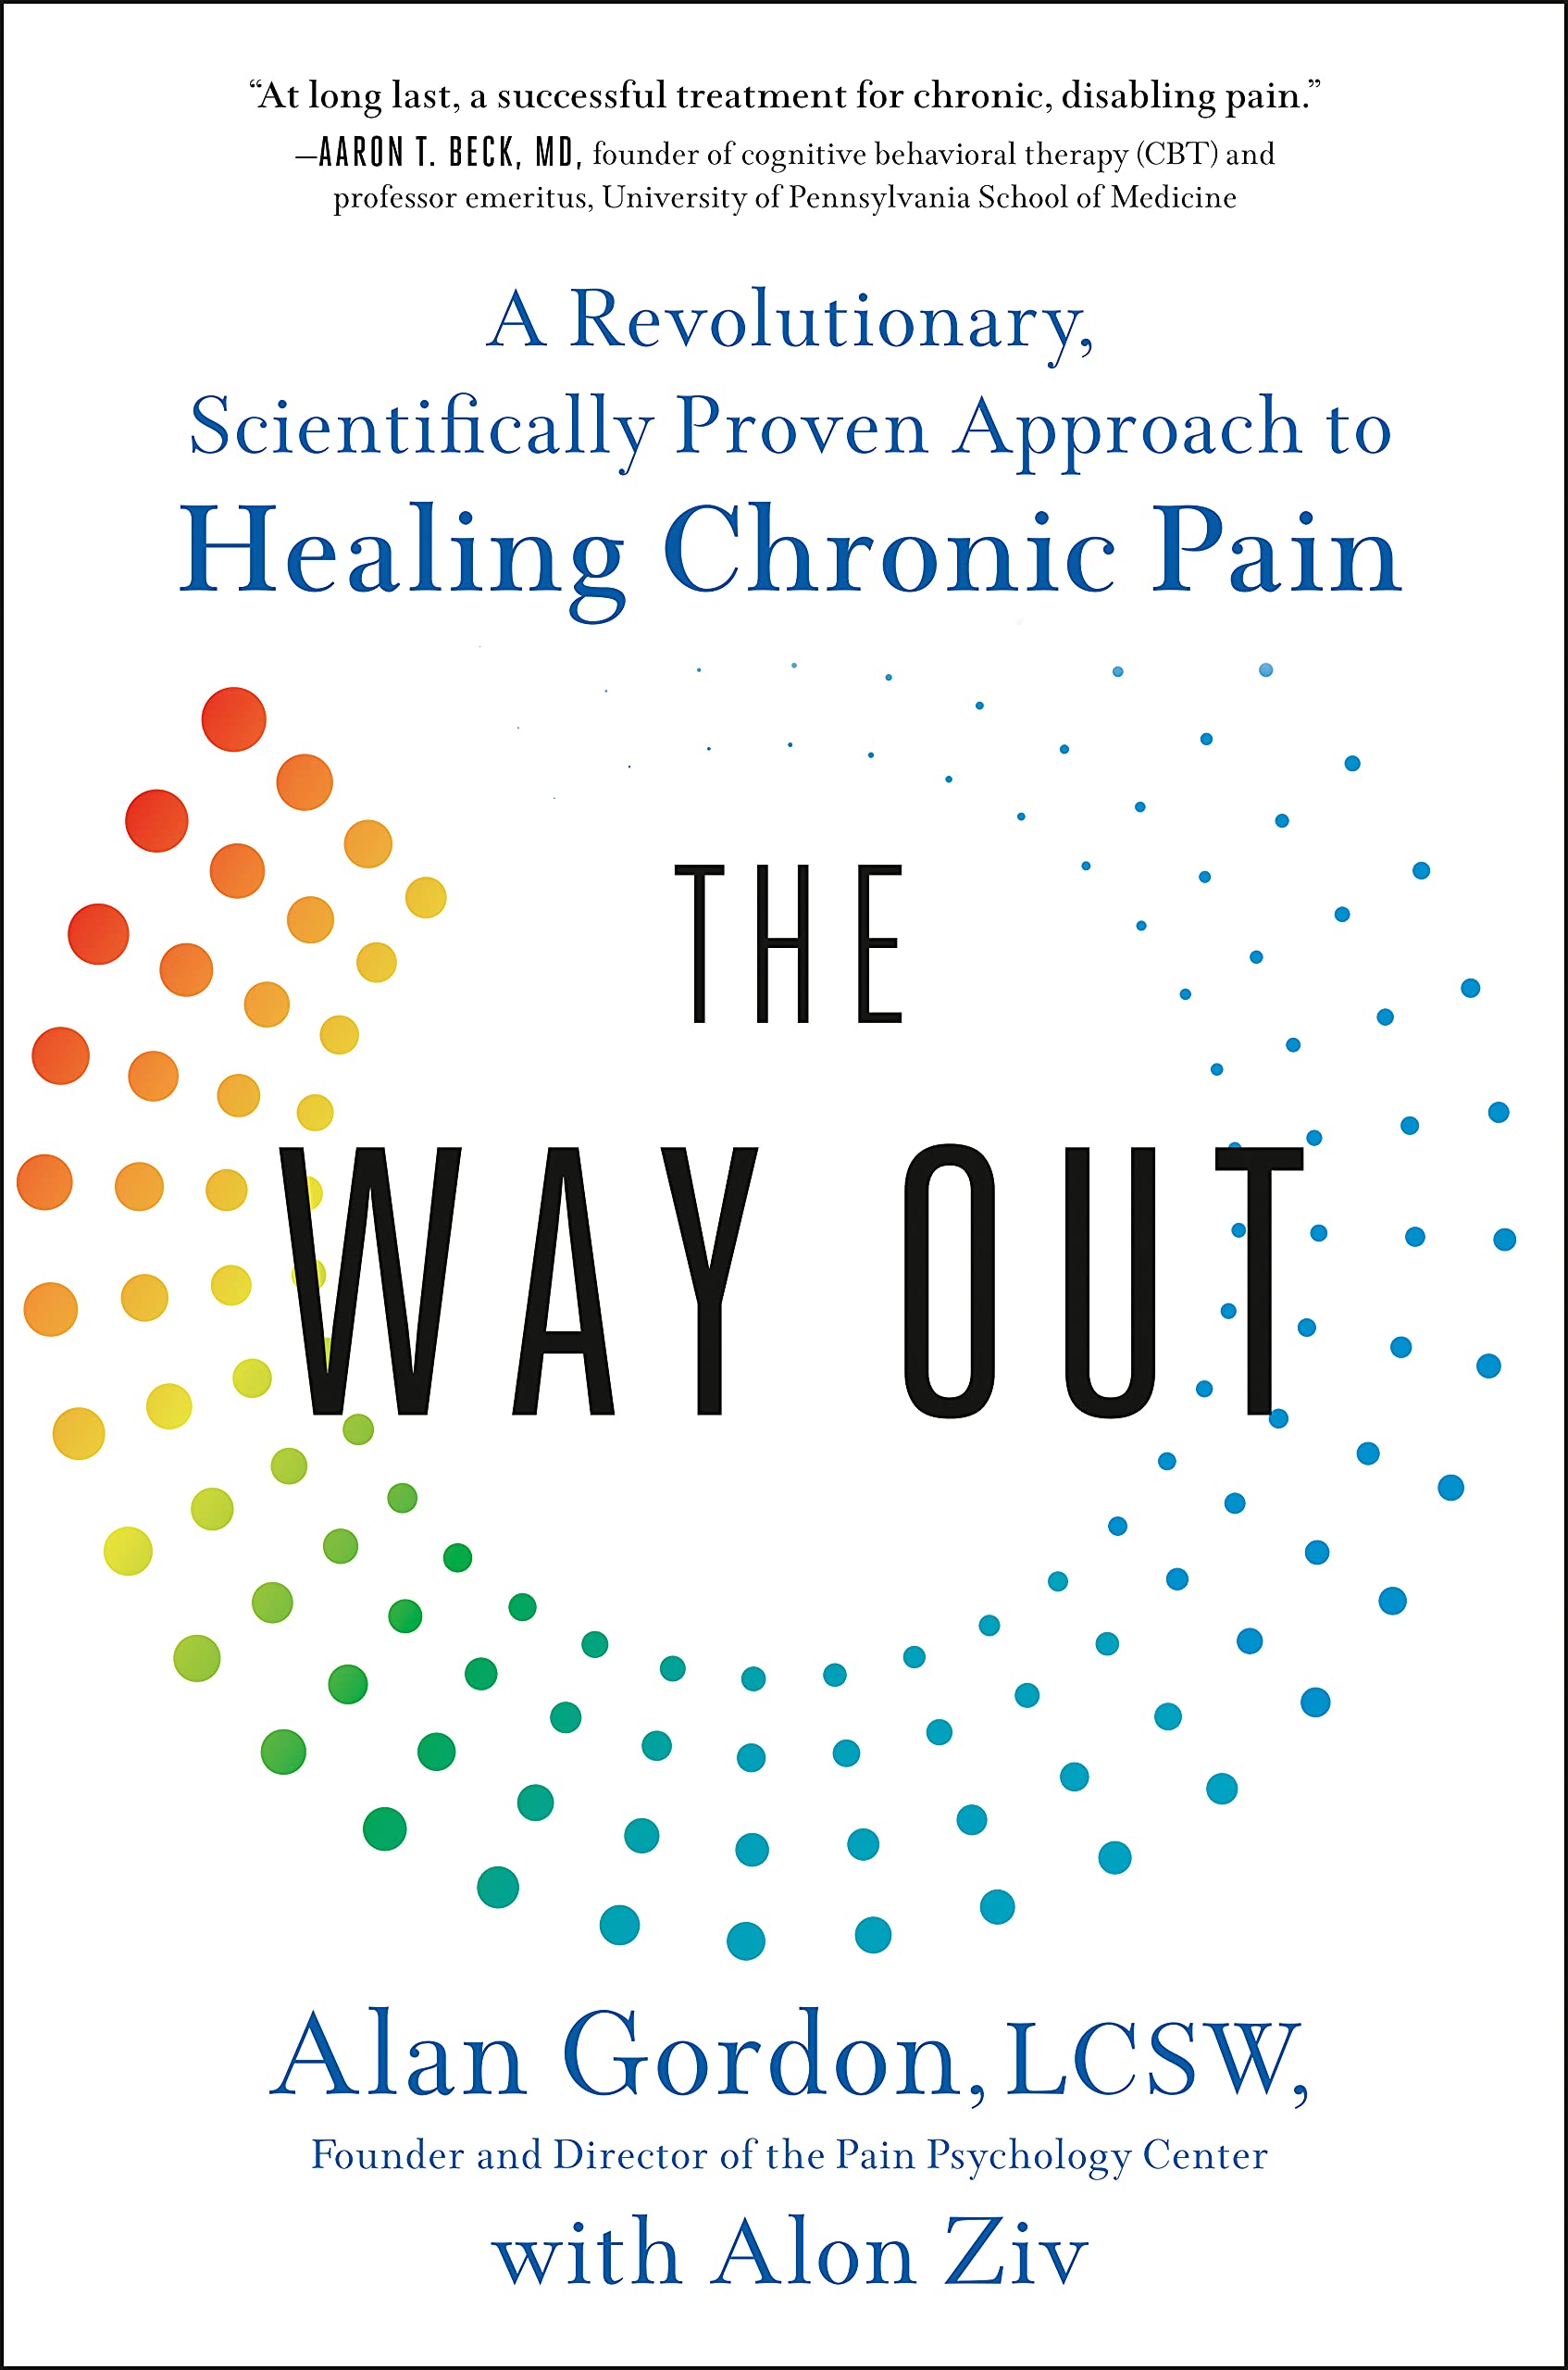 The Way Out: A Revolutionary, Scientifically Proven Approach to Healing Chronic Pain (eBook) by Alan Gordon, Alon Ziv $1.99